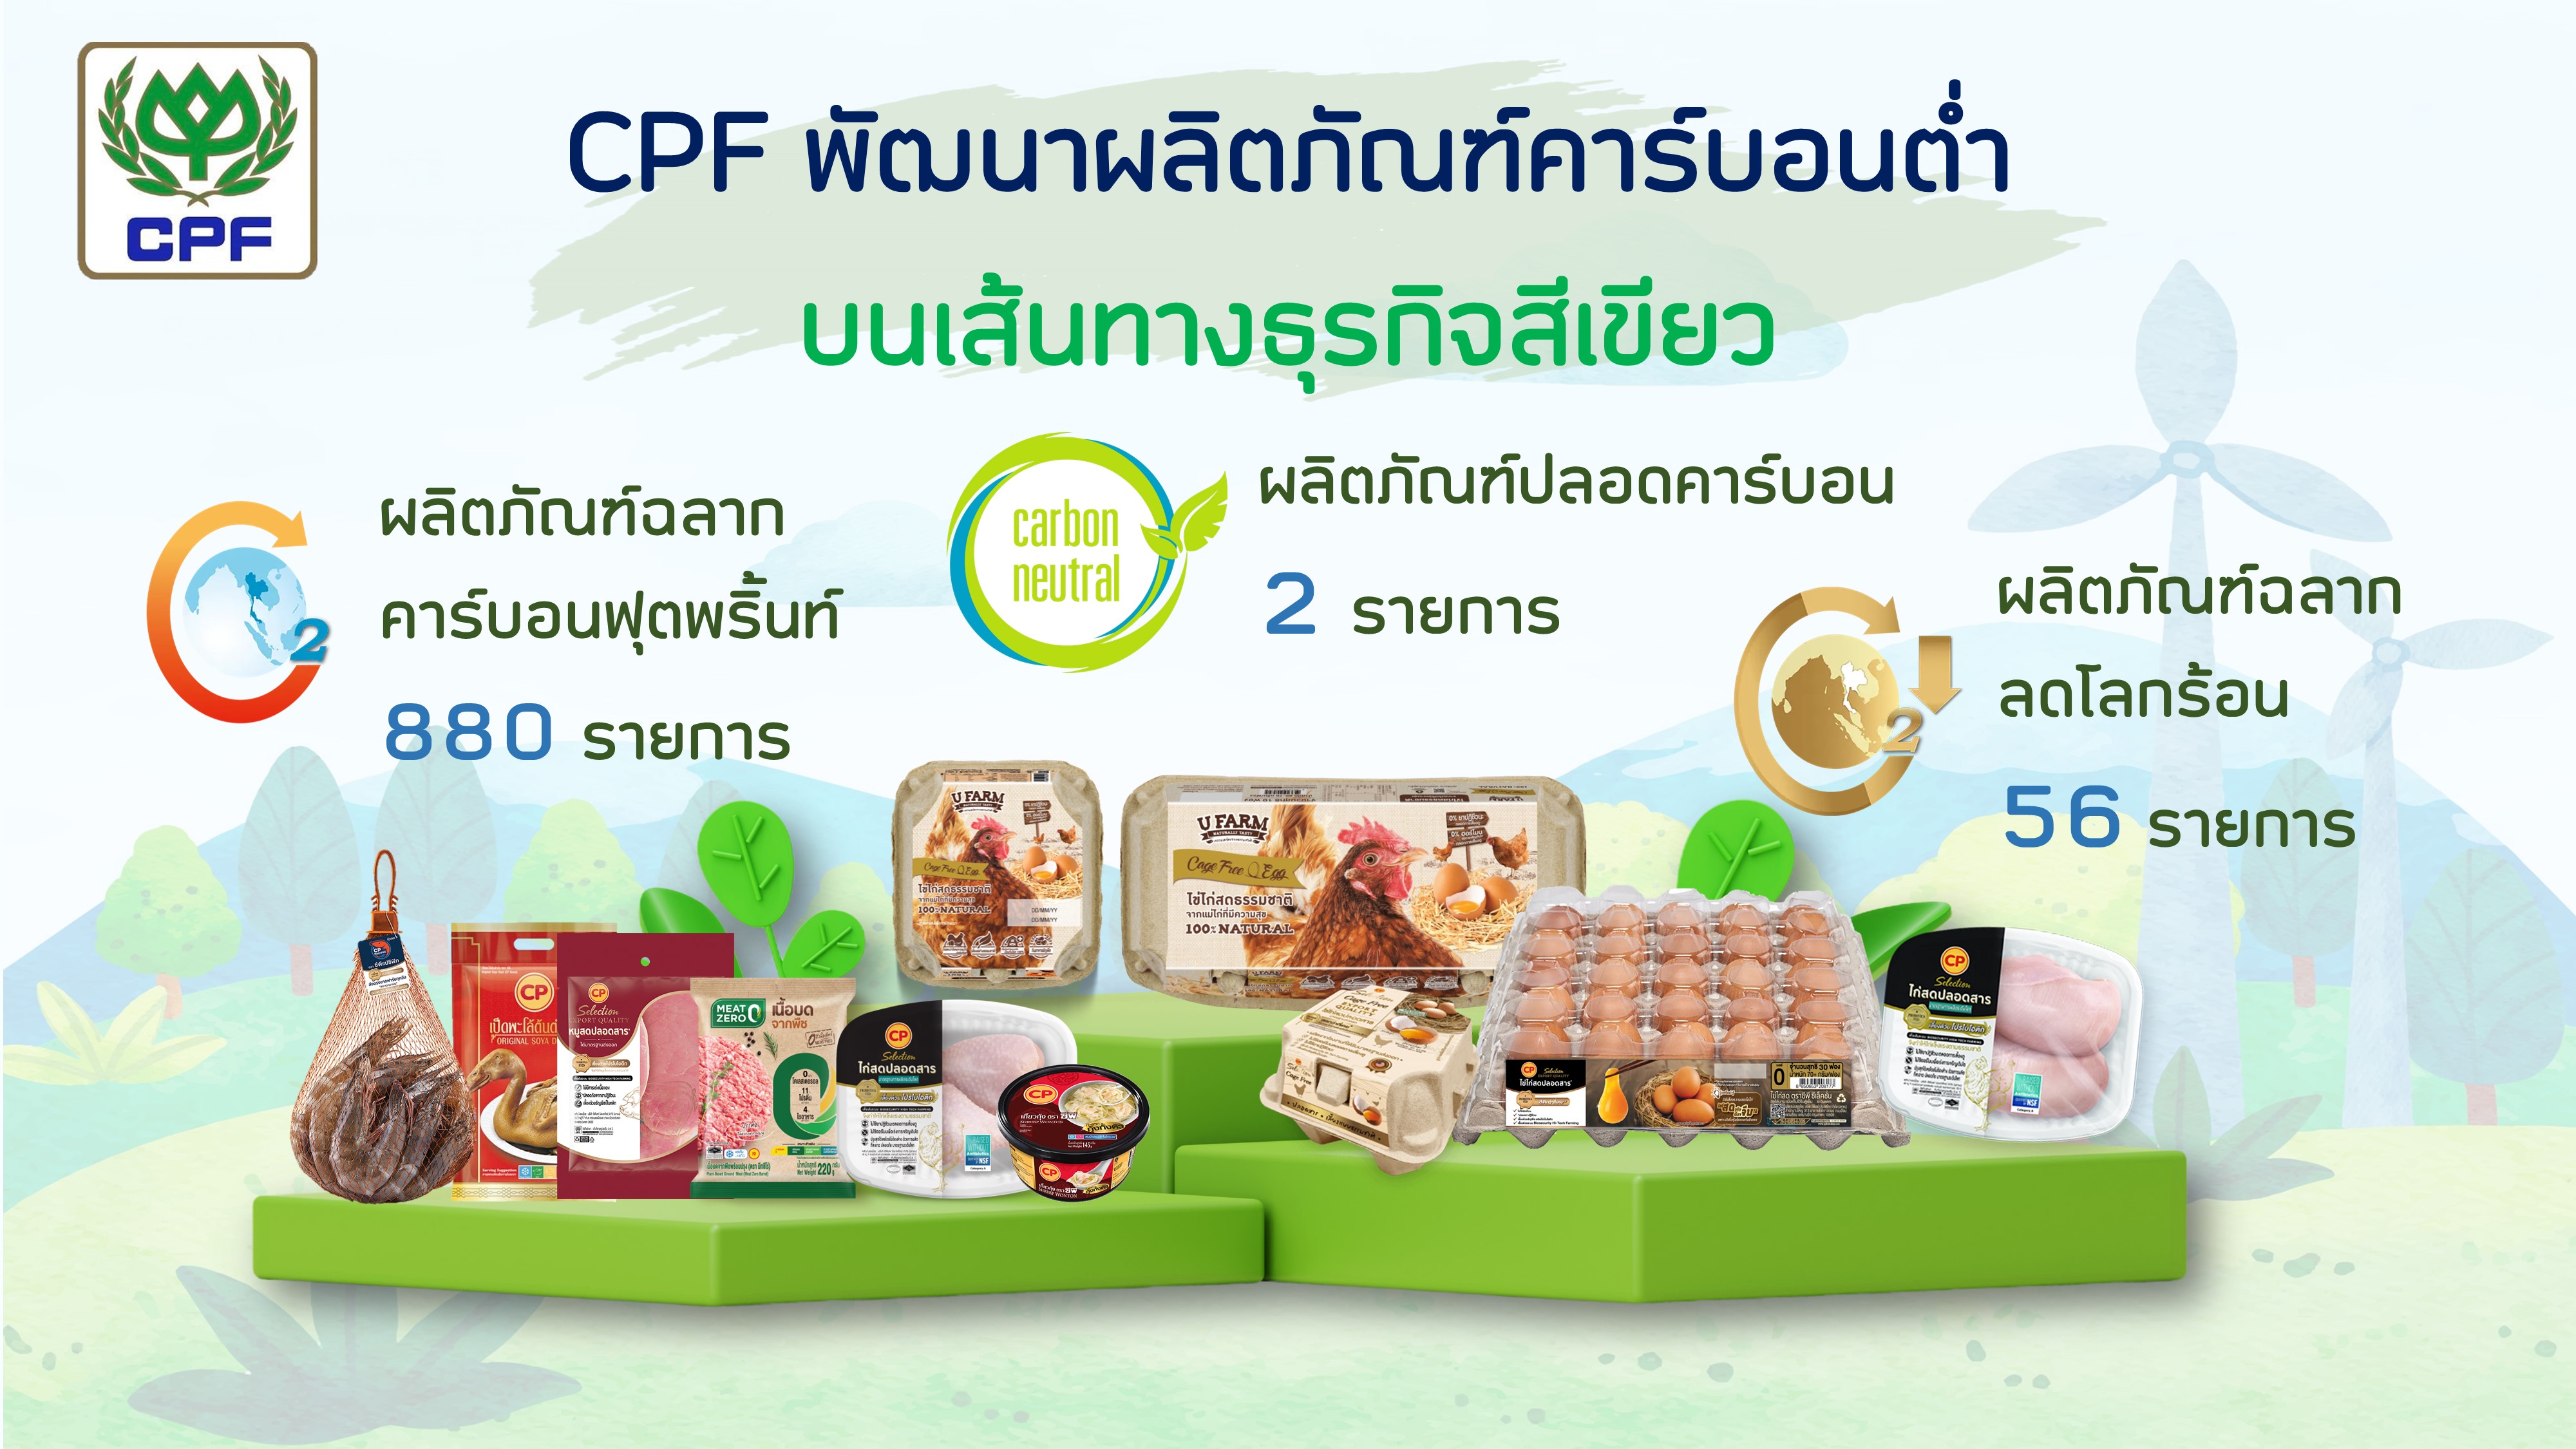 CP Foods Accelerates Towards Eco-Friendly Future with Low-Carbon Products, Aiming for 40% Green Revenue by 2030 